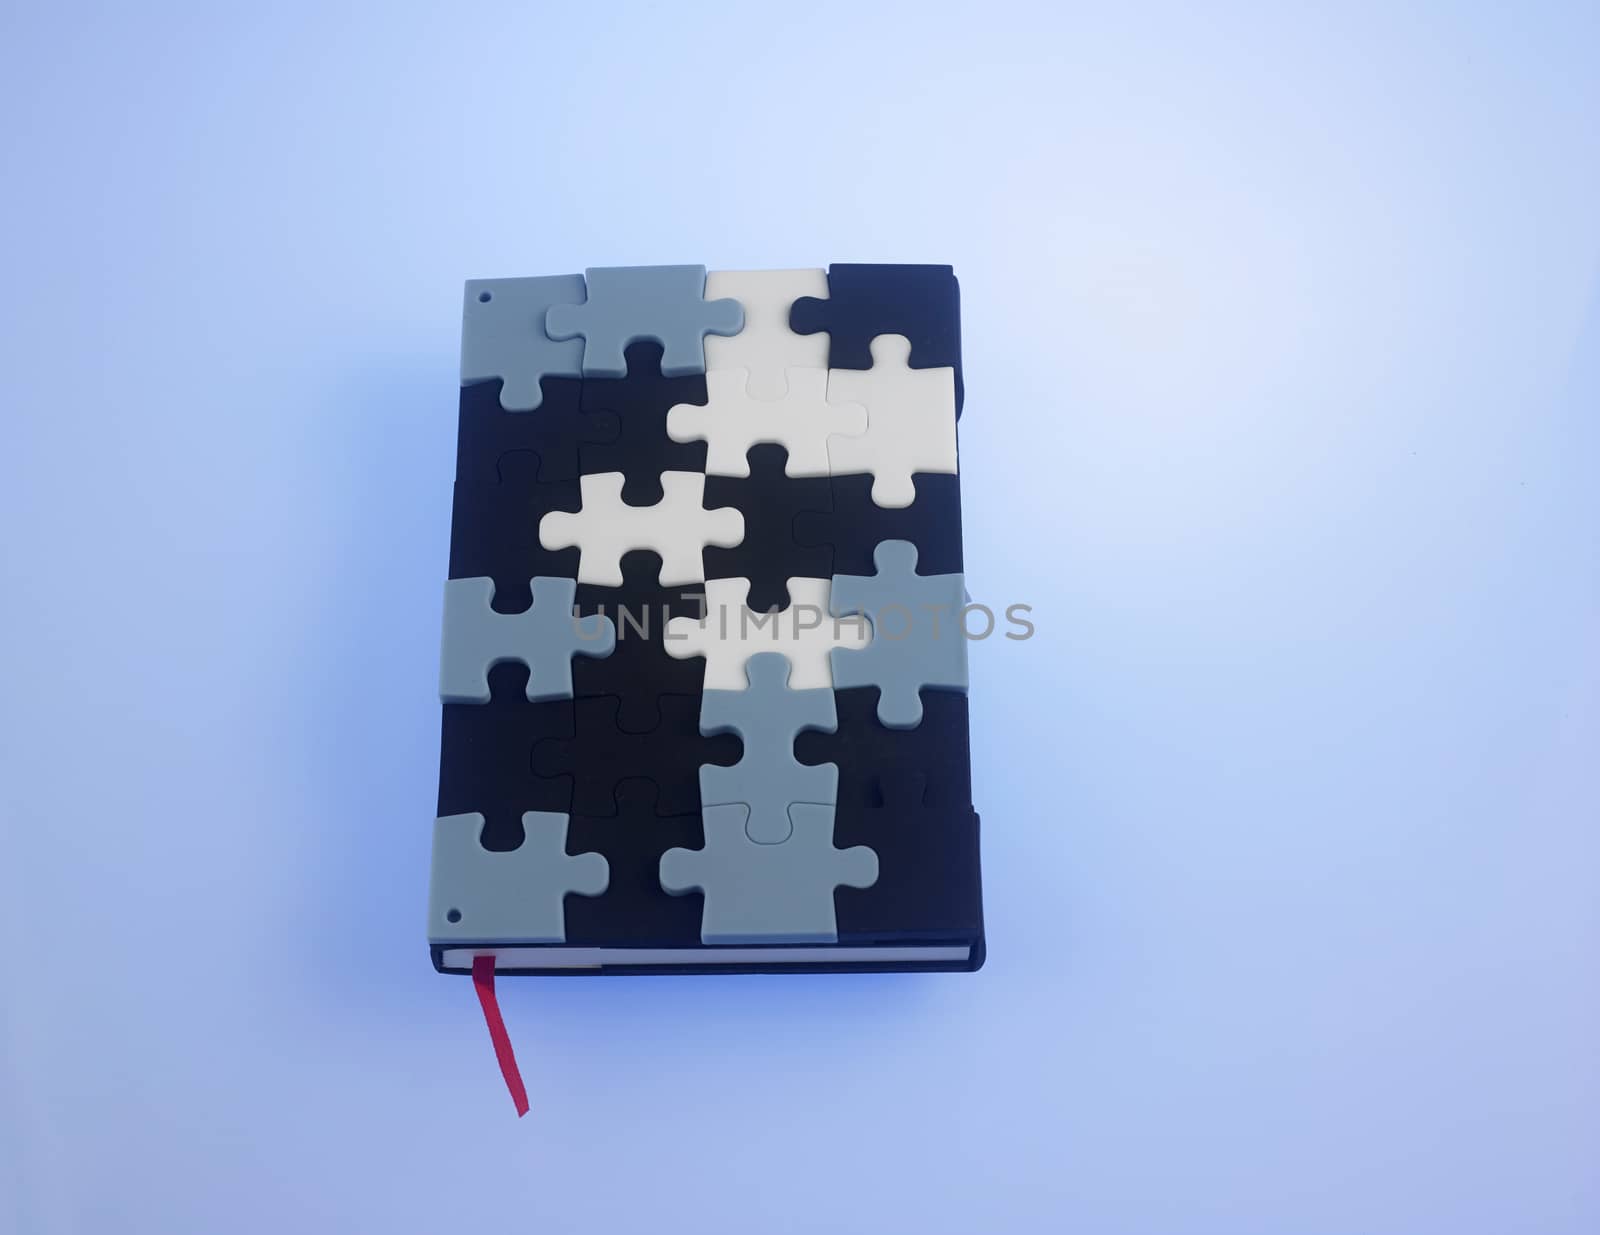 jigsaw puzzle note book on the blue background